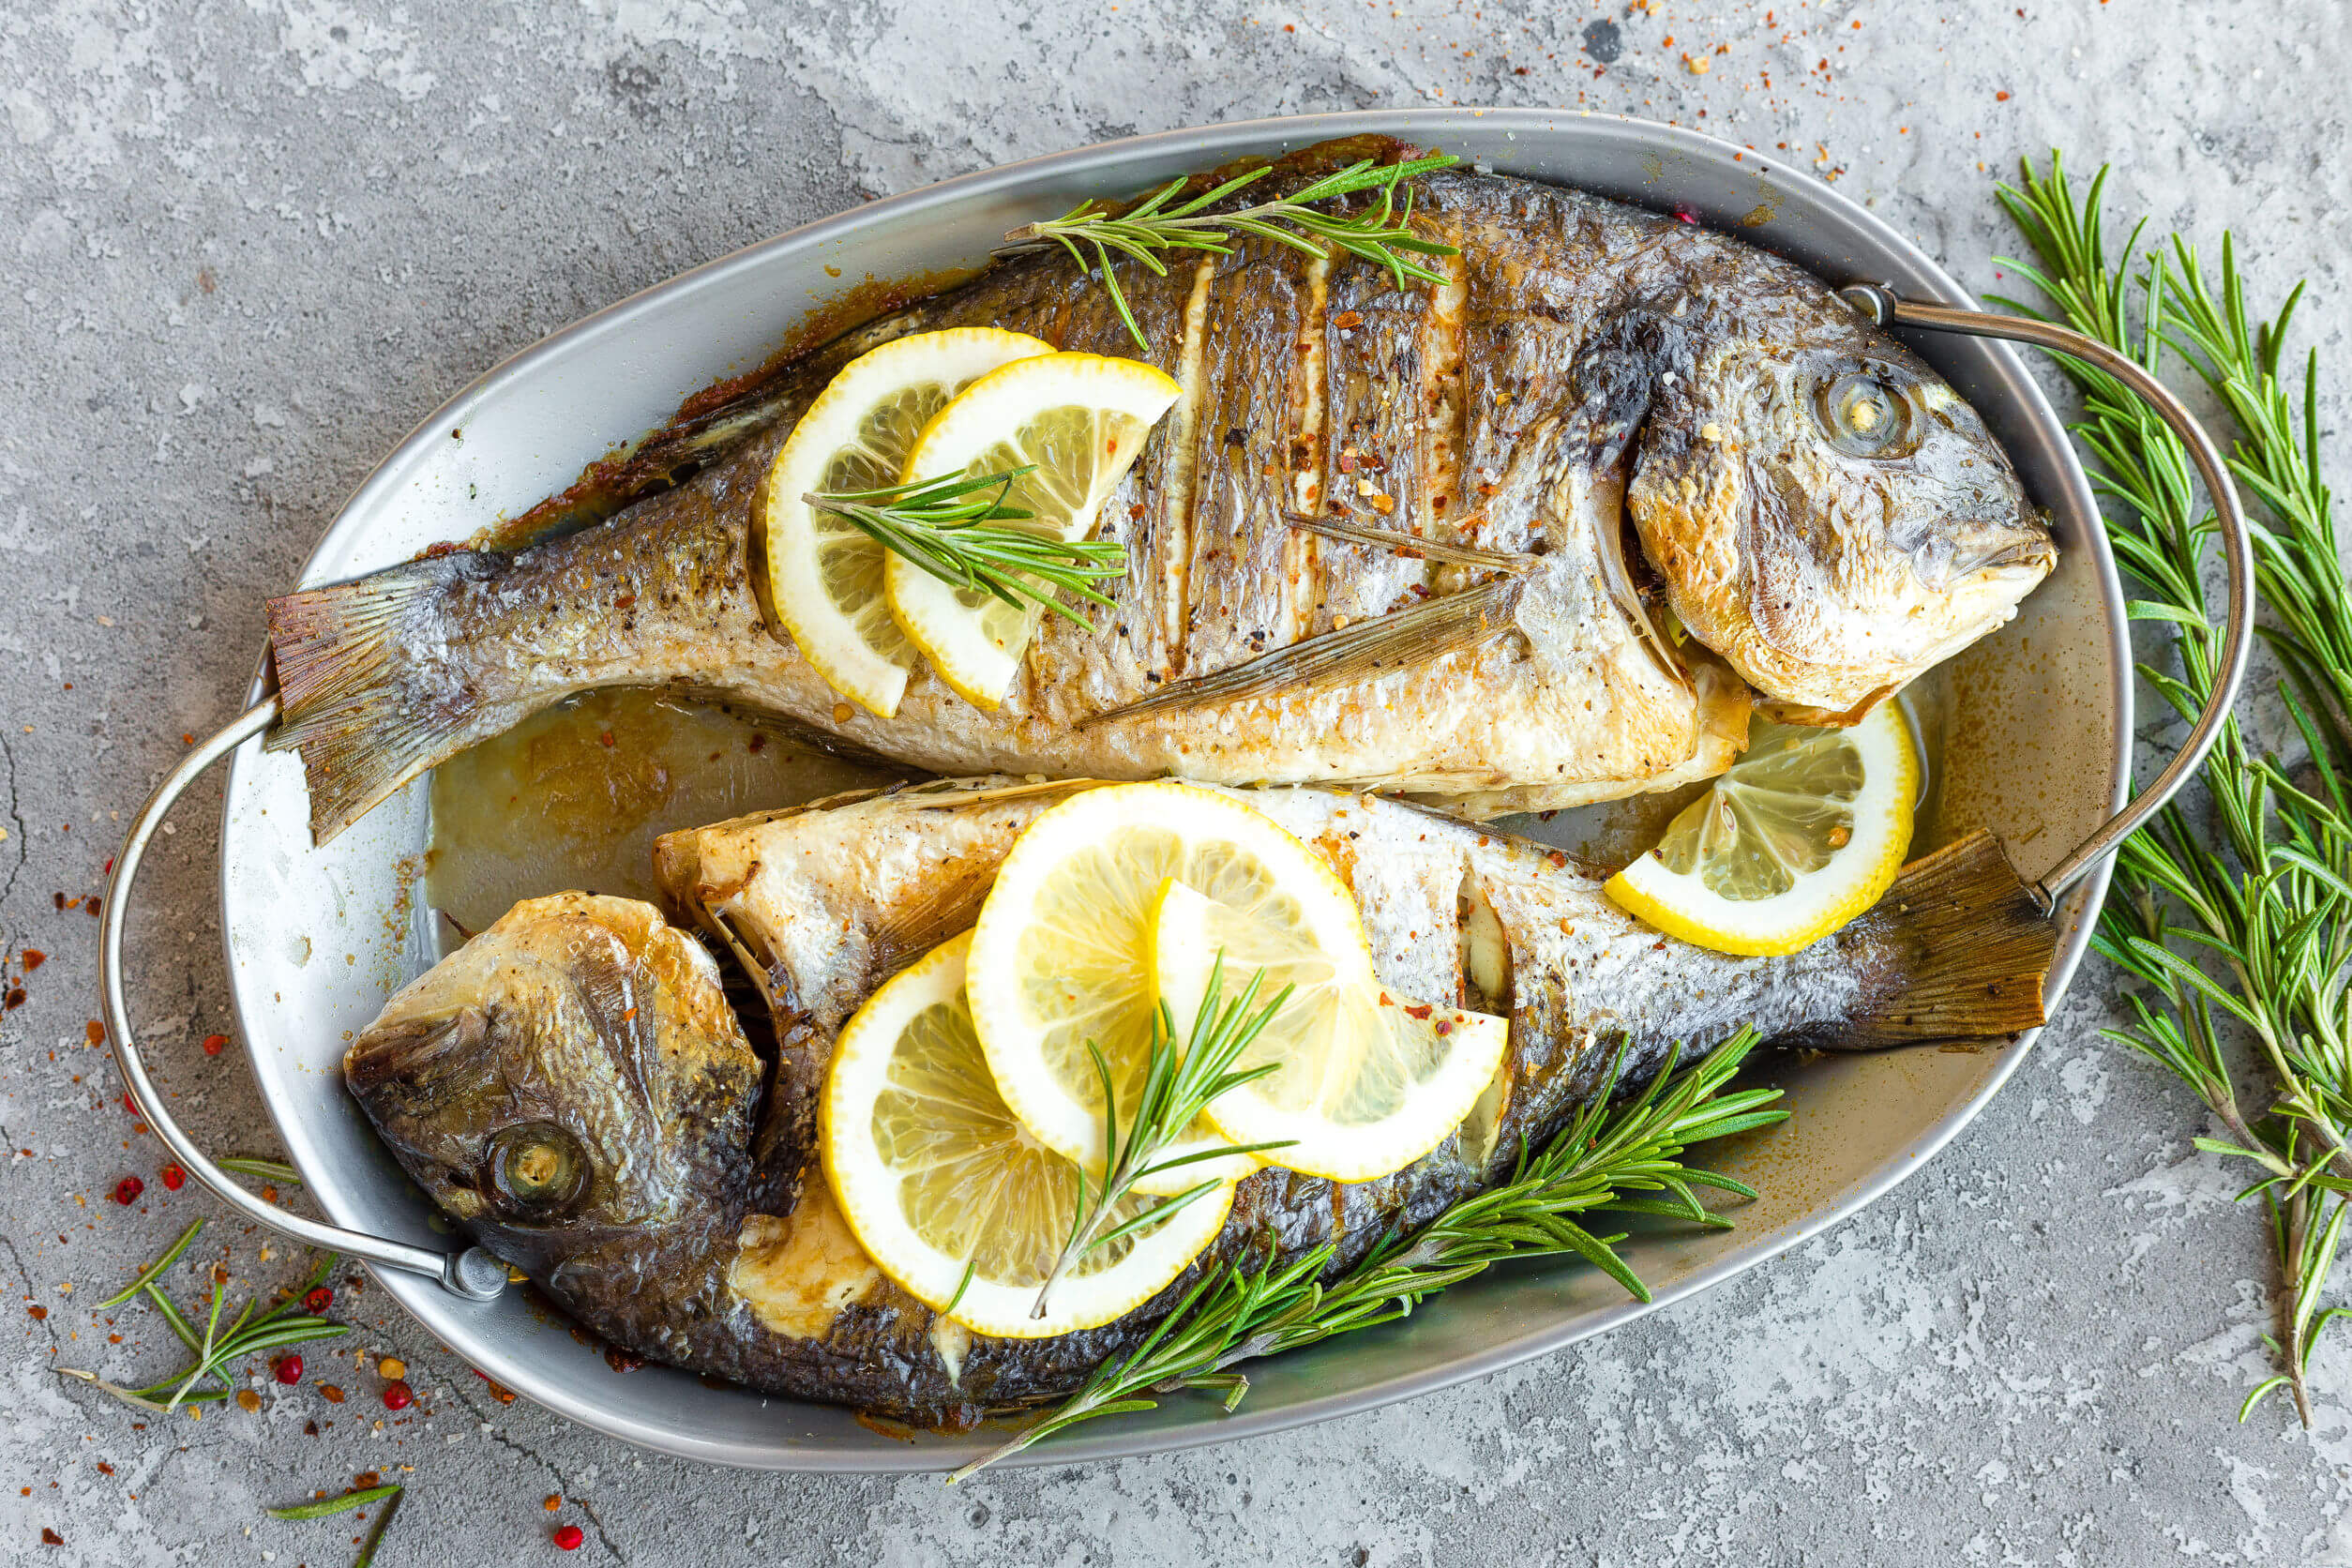 The Mediterranean diet usually includes fish.